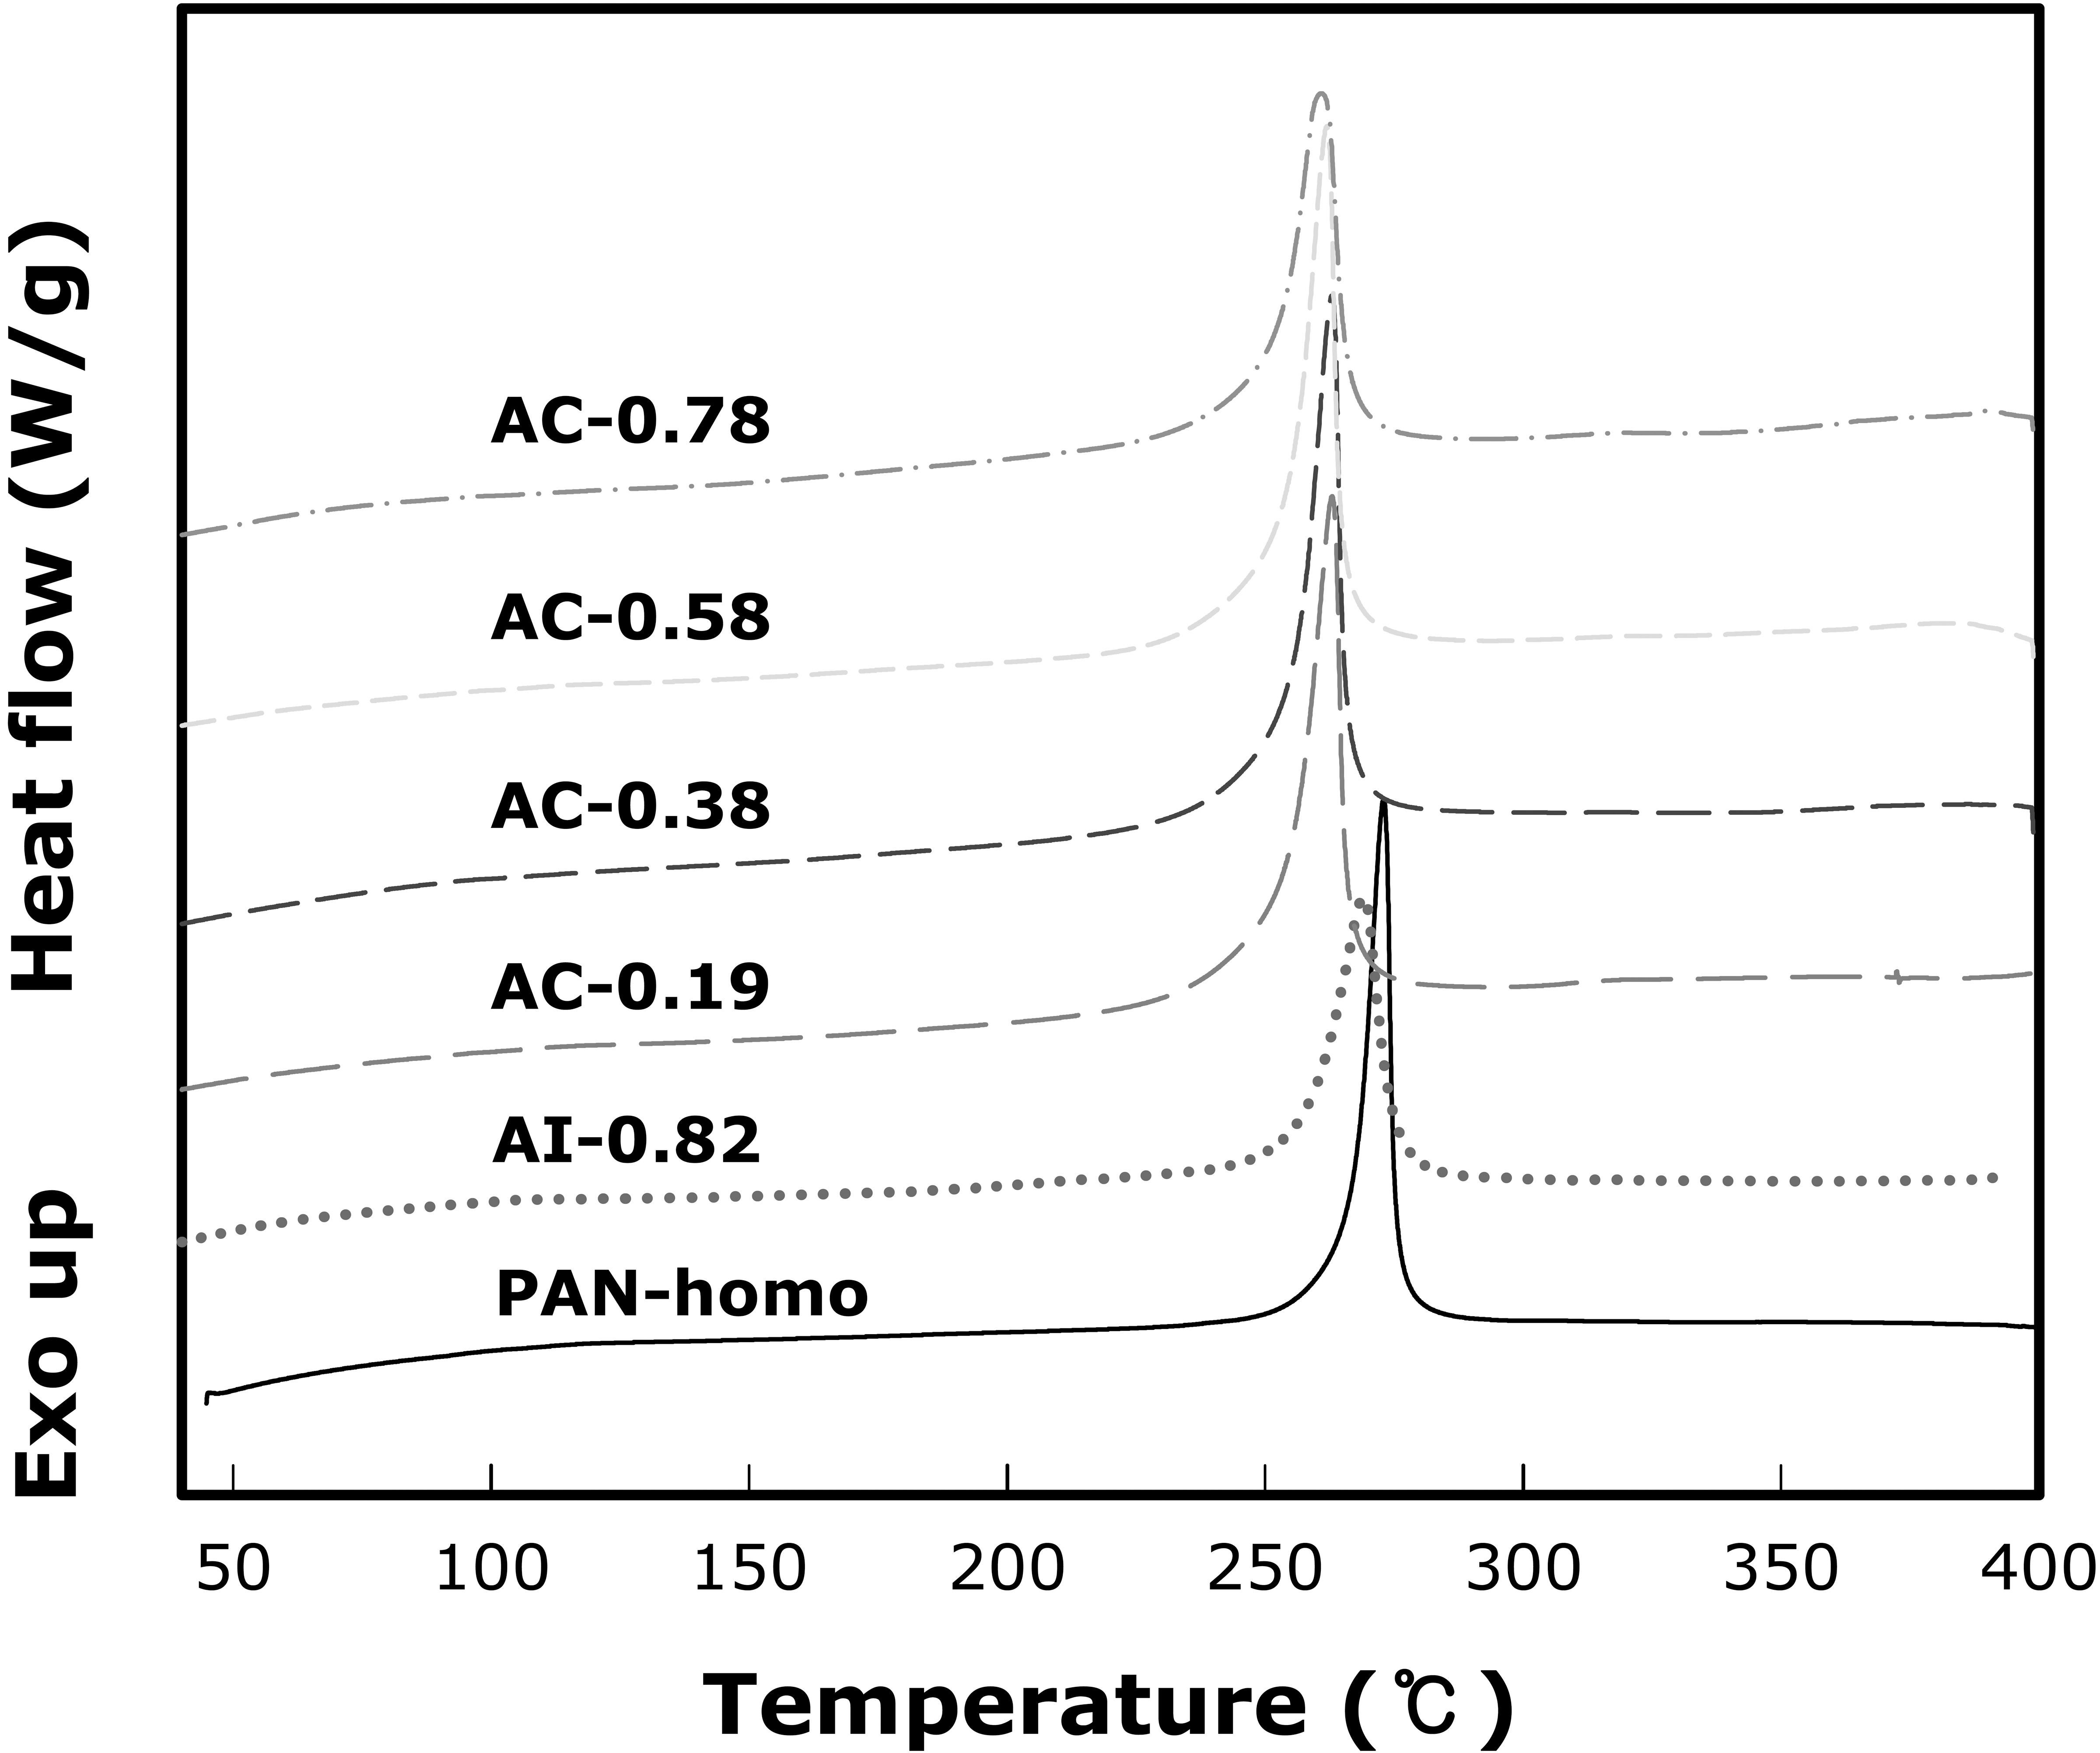 Differential scanning calorimetry thermograms of polyacrylonitrile(PAN) precursor in nitrogen atmosphere at a heating rate of 10oC/min.